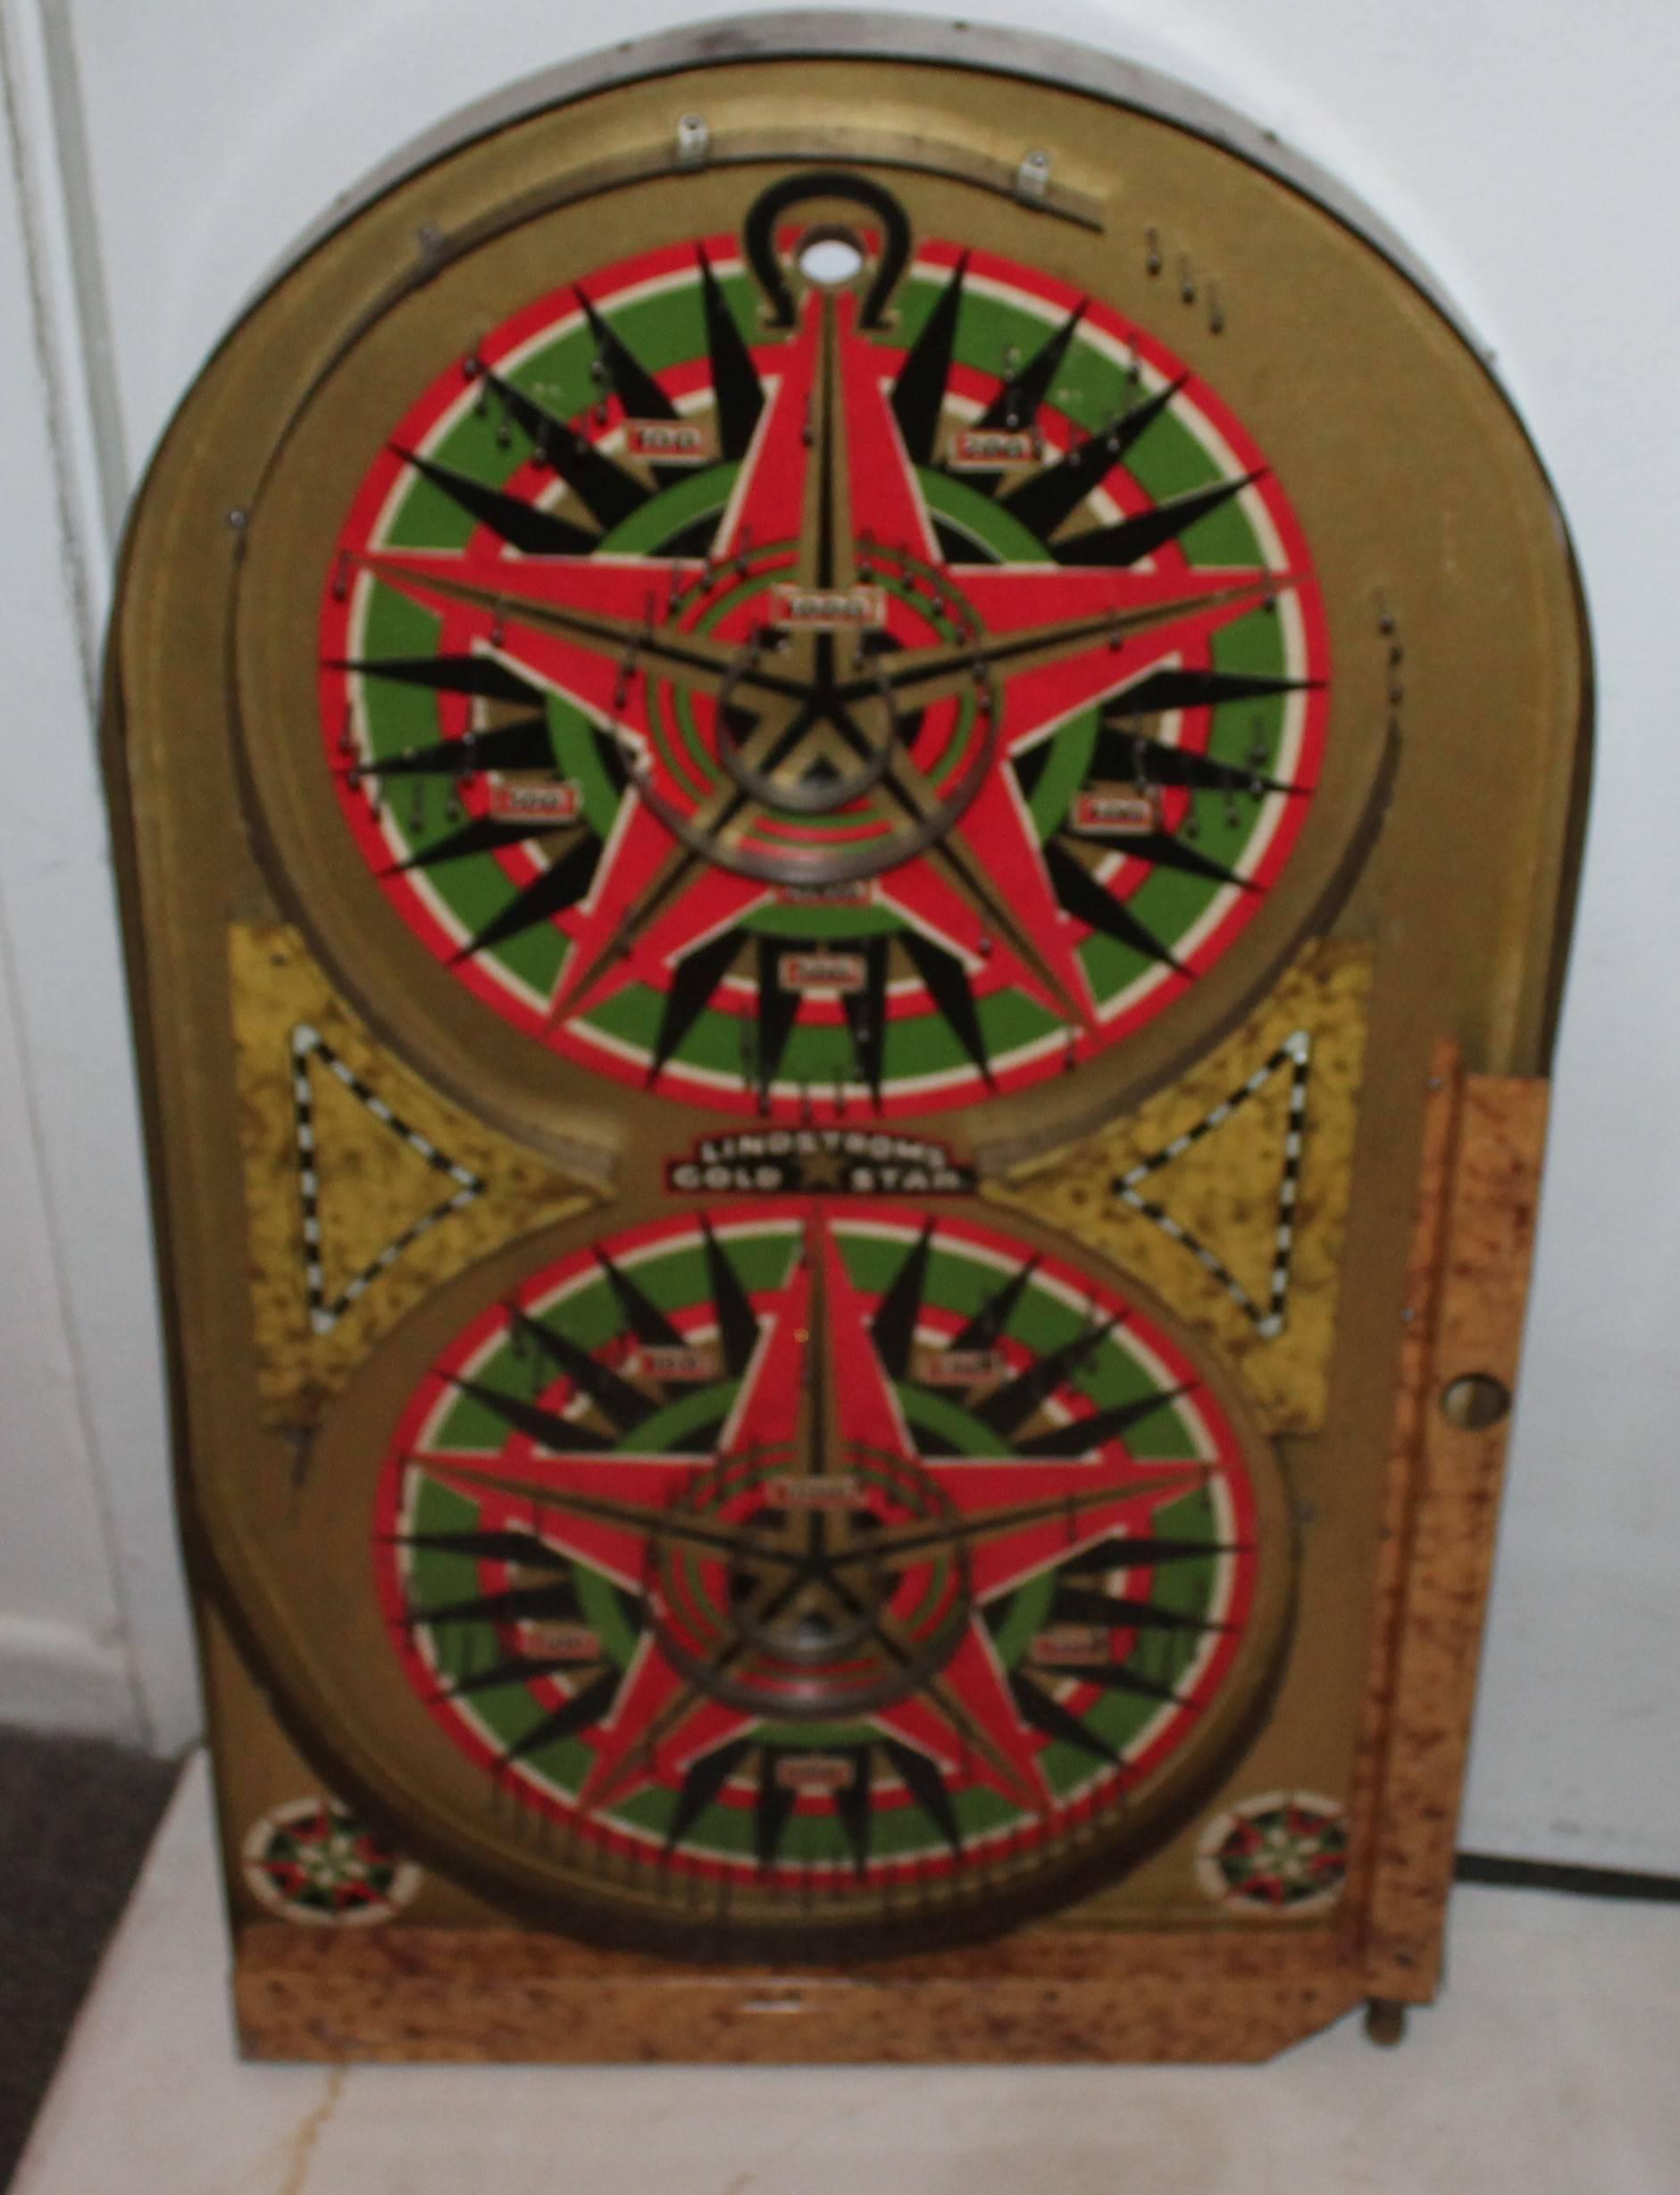 This fun tabletop game boards are in great as found condition. Lindstrom's Gold Star (signed on the reverse) , The Rocket Shot, also signed on reverse THE LINDSTROM TOY CO. , BRIDGEPORT , CONN., DEALER , SIGNED Joseph Schneider INC. NEW YORK. All in